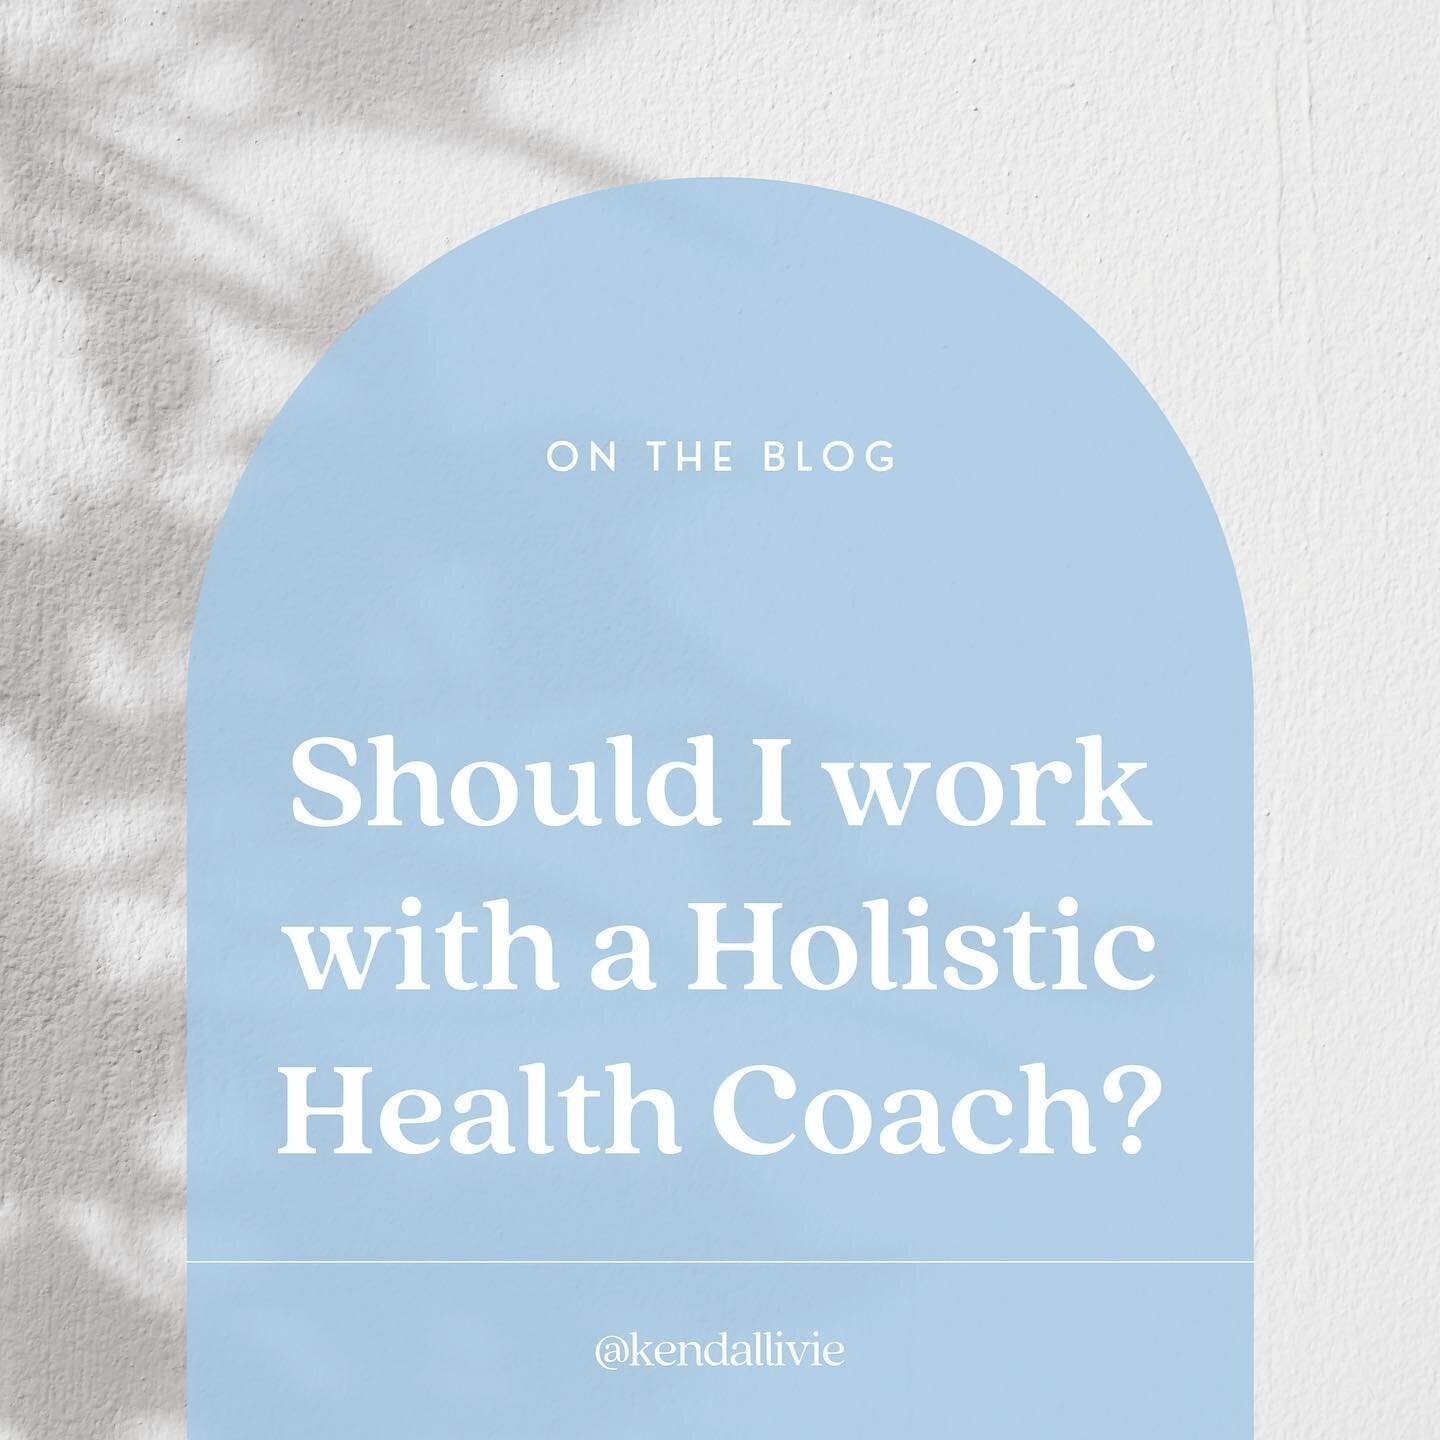 Should you work with a Holistic Health Coach?! 

Find out more by reading my blog on what a Holistic Health Coach actually is and how I can help! 

You&rsquo;ll learn: 
&bull; What a health coach is and is not
&bull; What a session could look like
&b